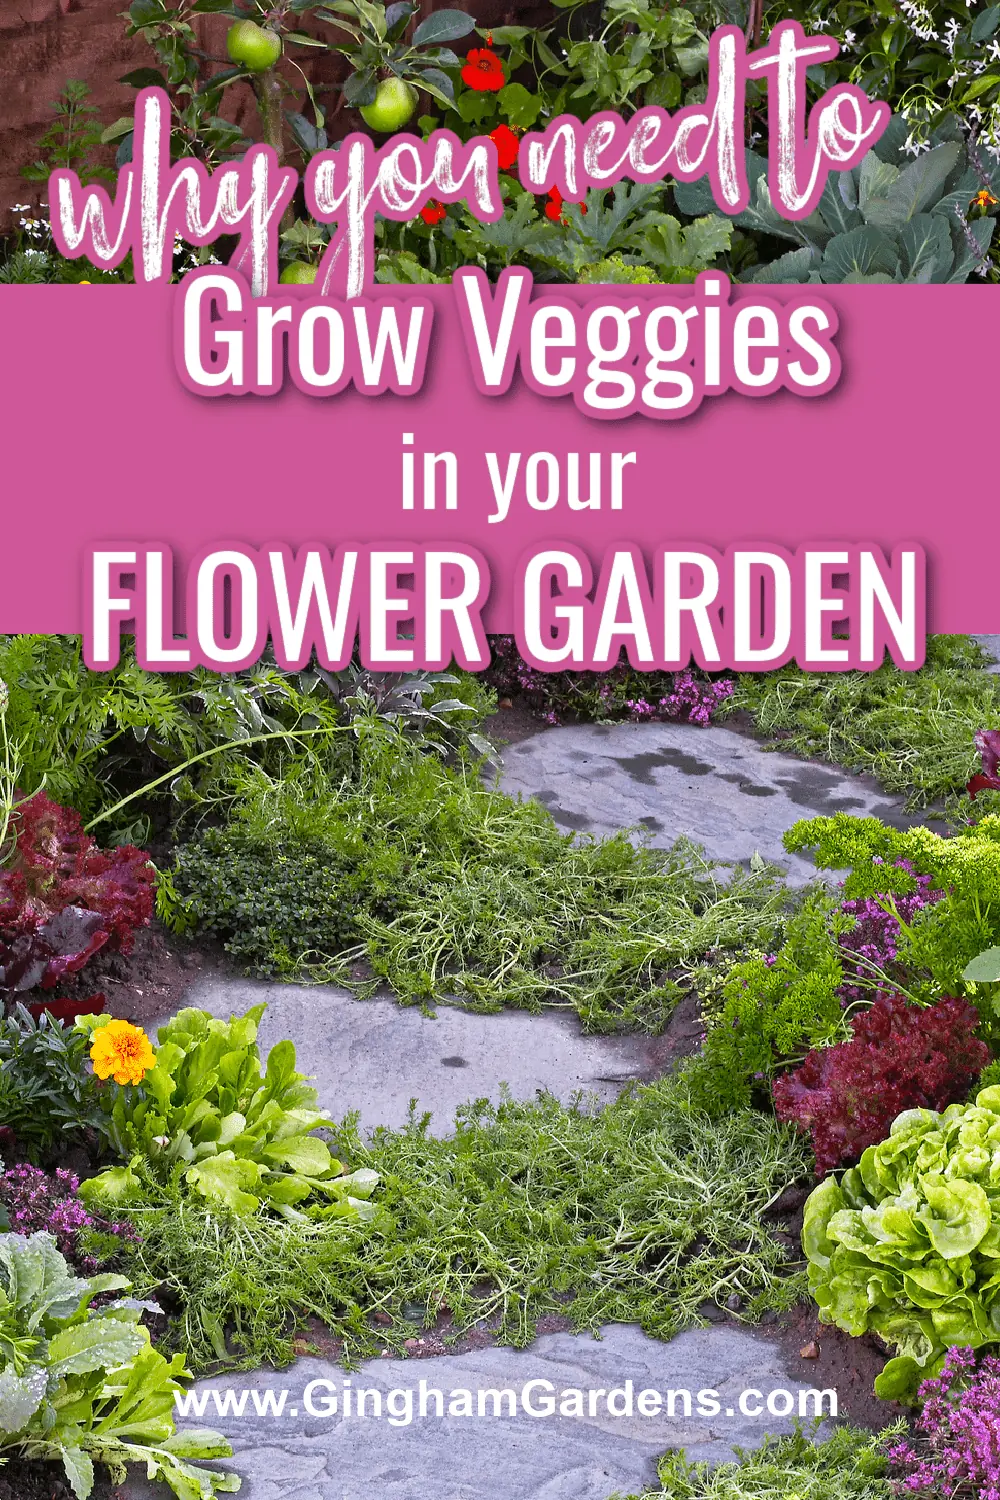 Flower and vegetable garden with text overlay - why you need to grow veggies in your flower garden.